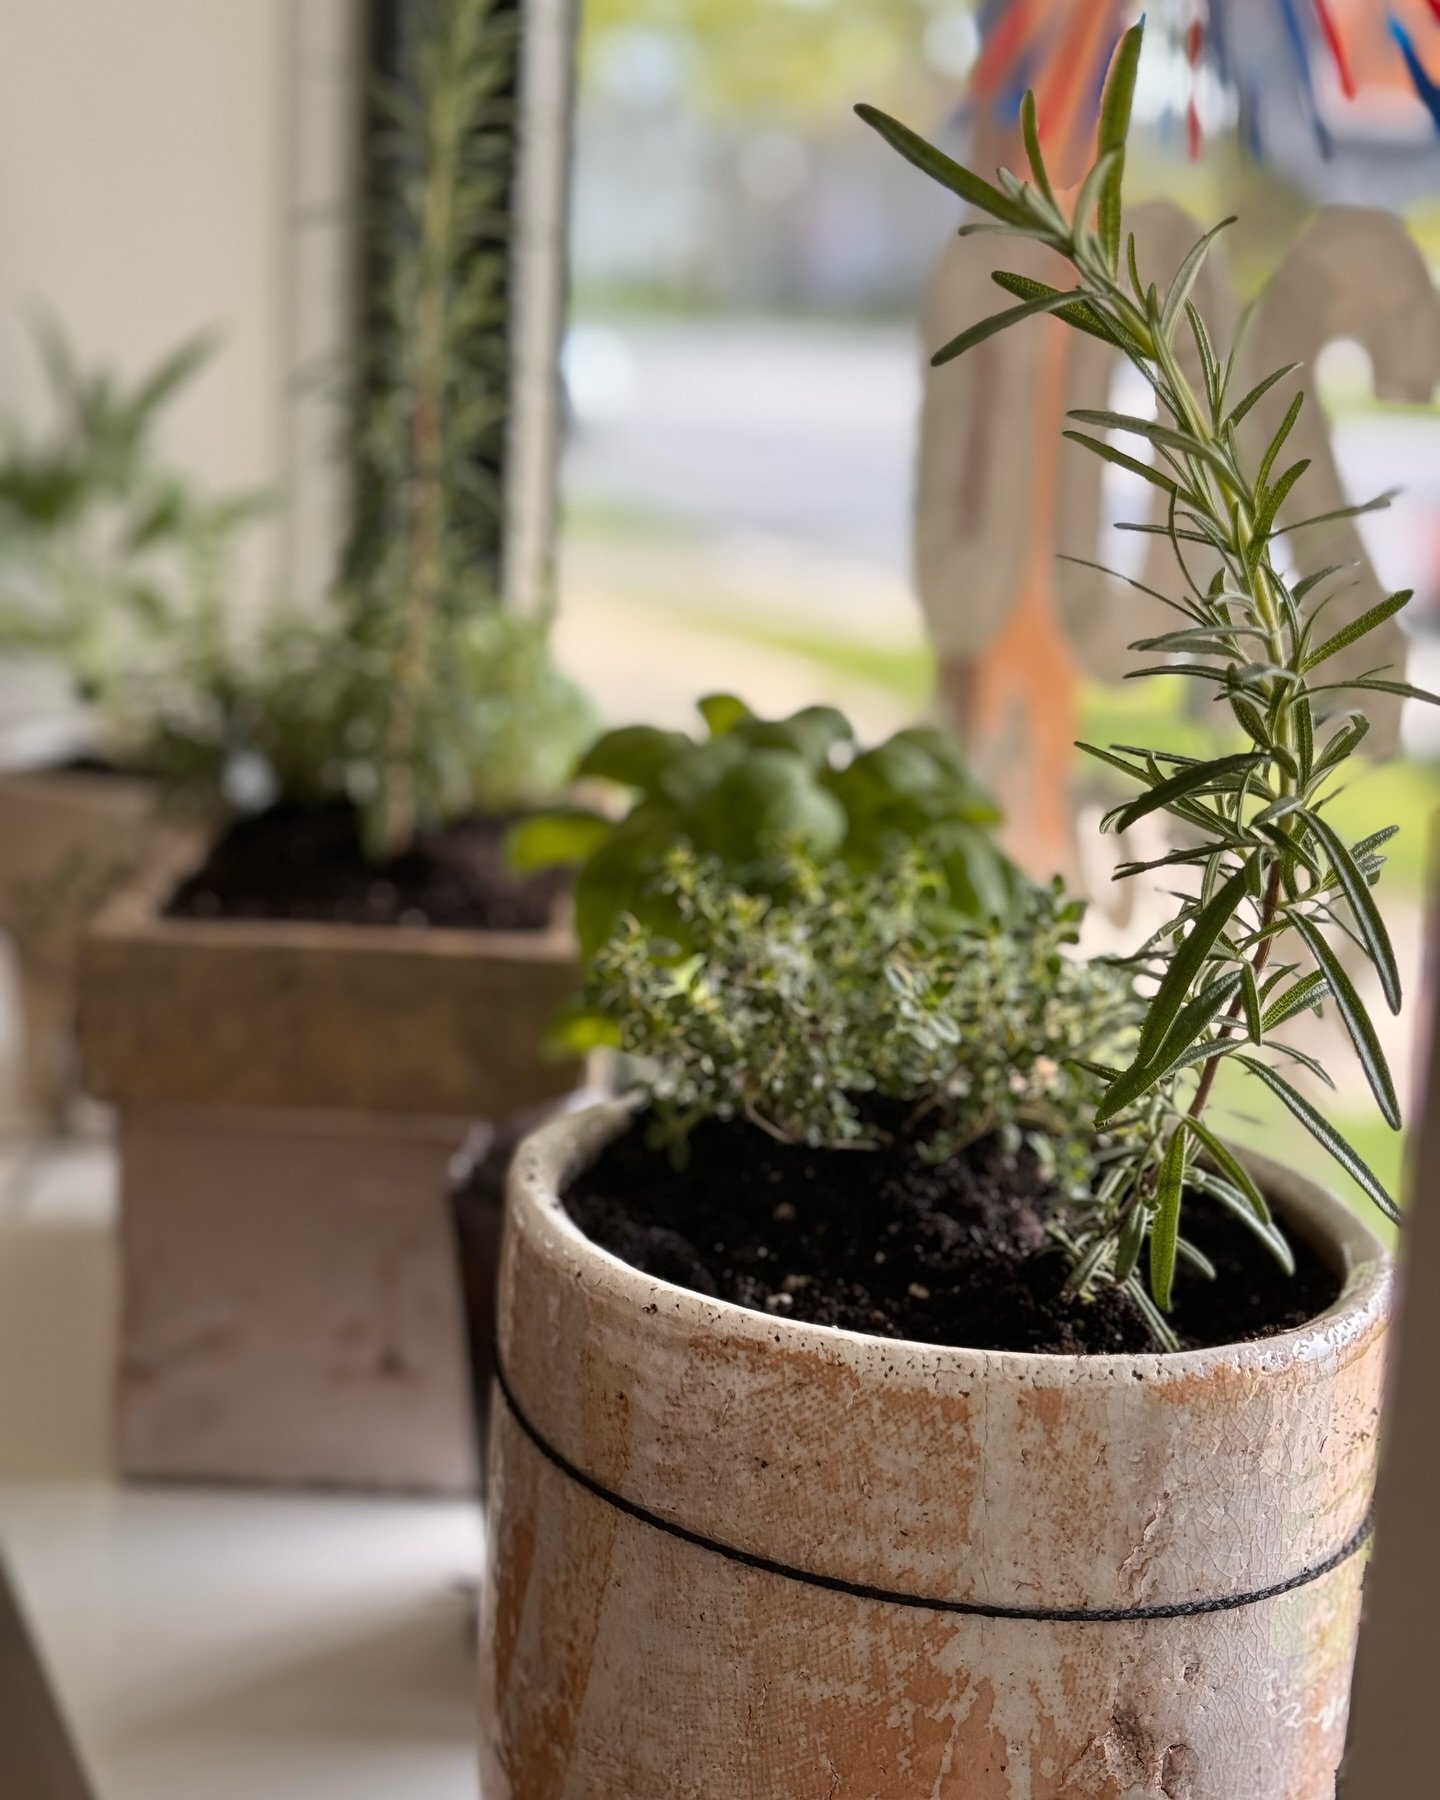 🌎 Happy Earth Day! We have planted our favorite herbs, perfect for your kitchen window into the best vintage and antique pots. The studio smells incredible! 🌱 

#designstudio 
#vintage 
#planting 
#kitchenherbs